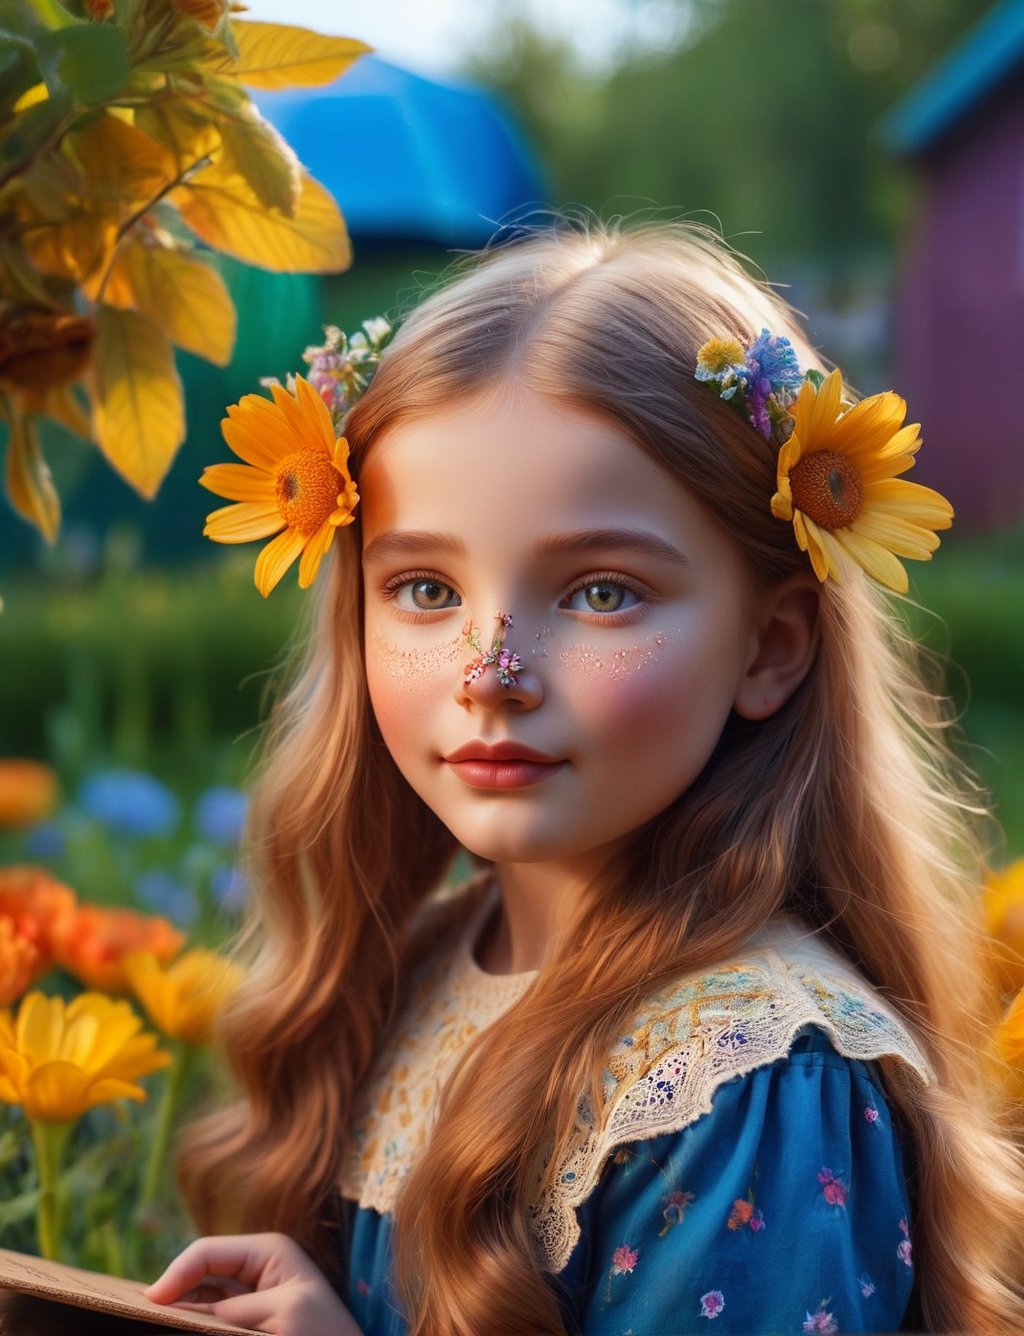  girl holding a sign that says "1 year tensor art", detailed portrait, detailed eyes, detailed nose, detailed lips, long hair, outdoor scene, sunlight, garden, flowers, colorful,